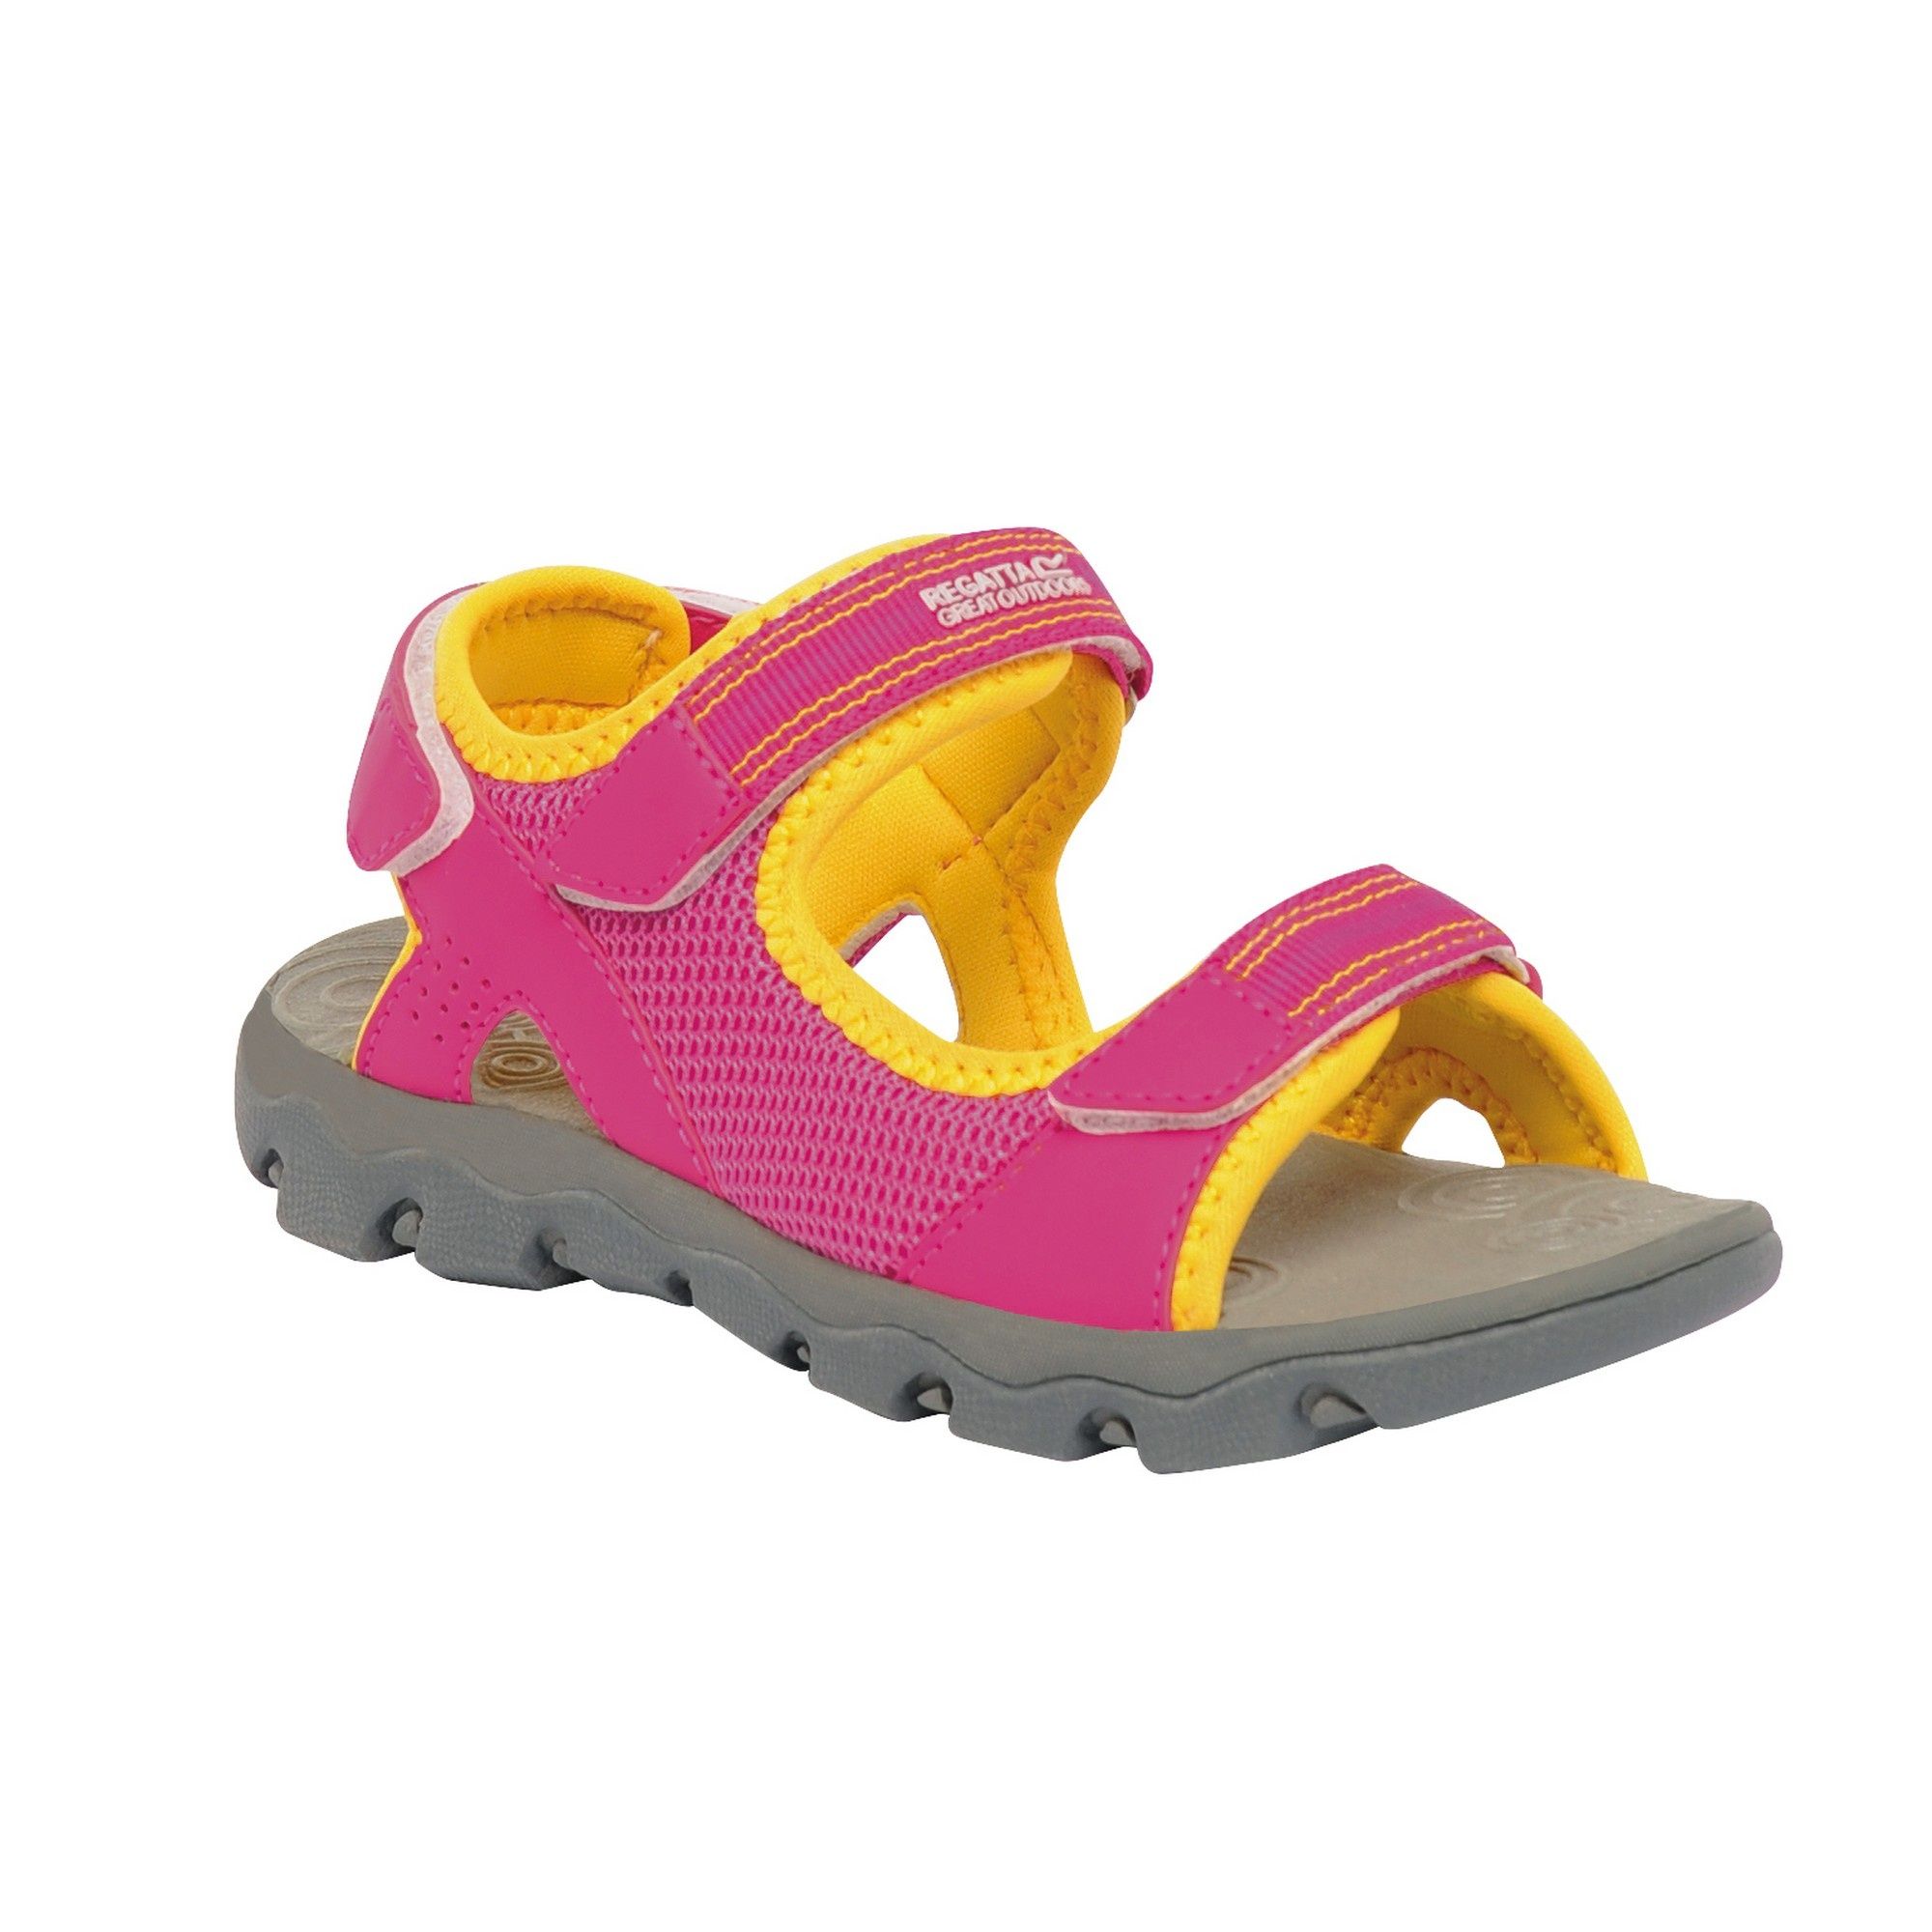 The Terrarock Junior is our kids mini adventure sandal with three adjustable straps to keep feet nice and secure. The summery mesh uppers are fully lined with soft and stretchy spandex for comfort, and the backstrap is cushioned for extra protection. A super-grippy tread helps give sure-footing on pebble beaches and grassy areas while the water-friendly footbed means they can hop-over streams and jump in puddles to their hearts content. 85% Other Fibres, 15% Polyamide.